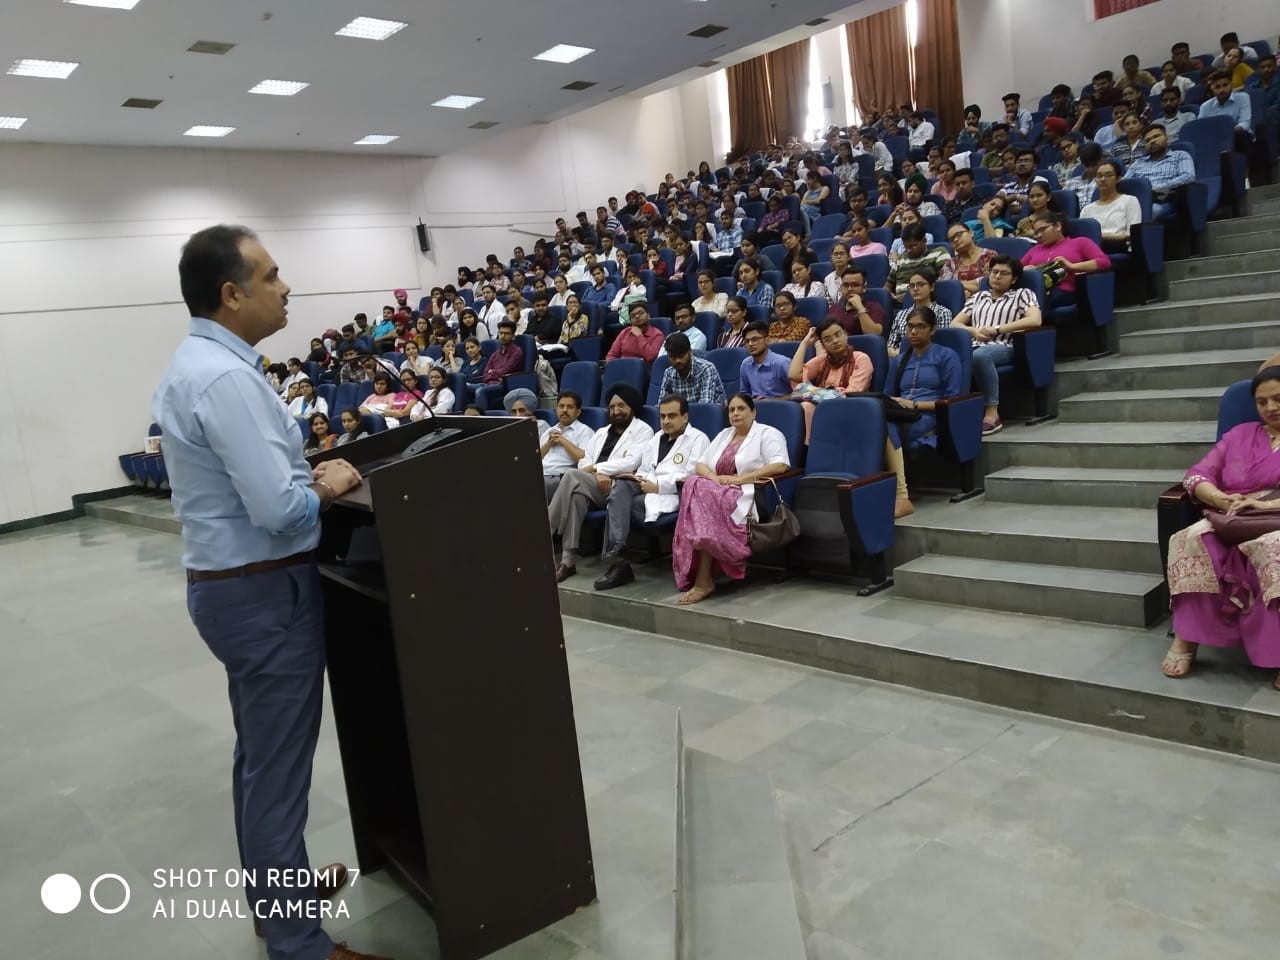 Mr. Amit Singh Resident Director addressing a joint session of MBBS Batch 2018 and 2019